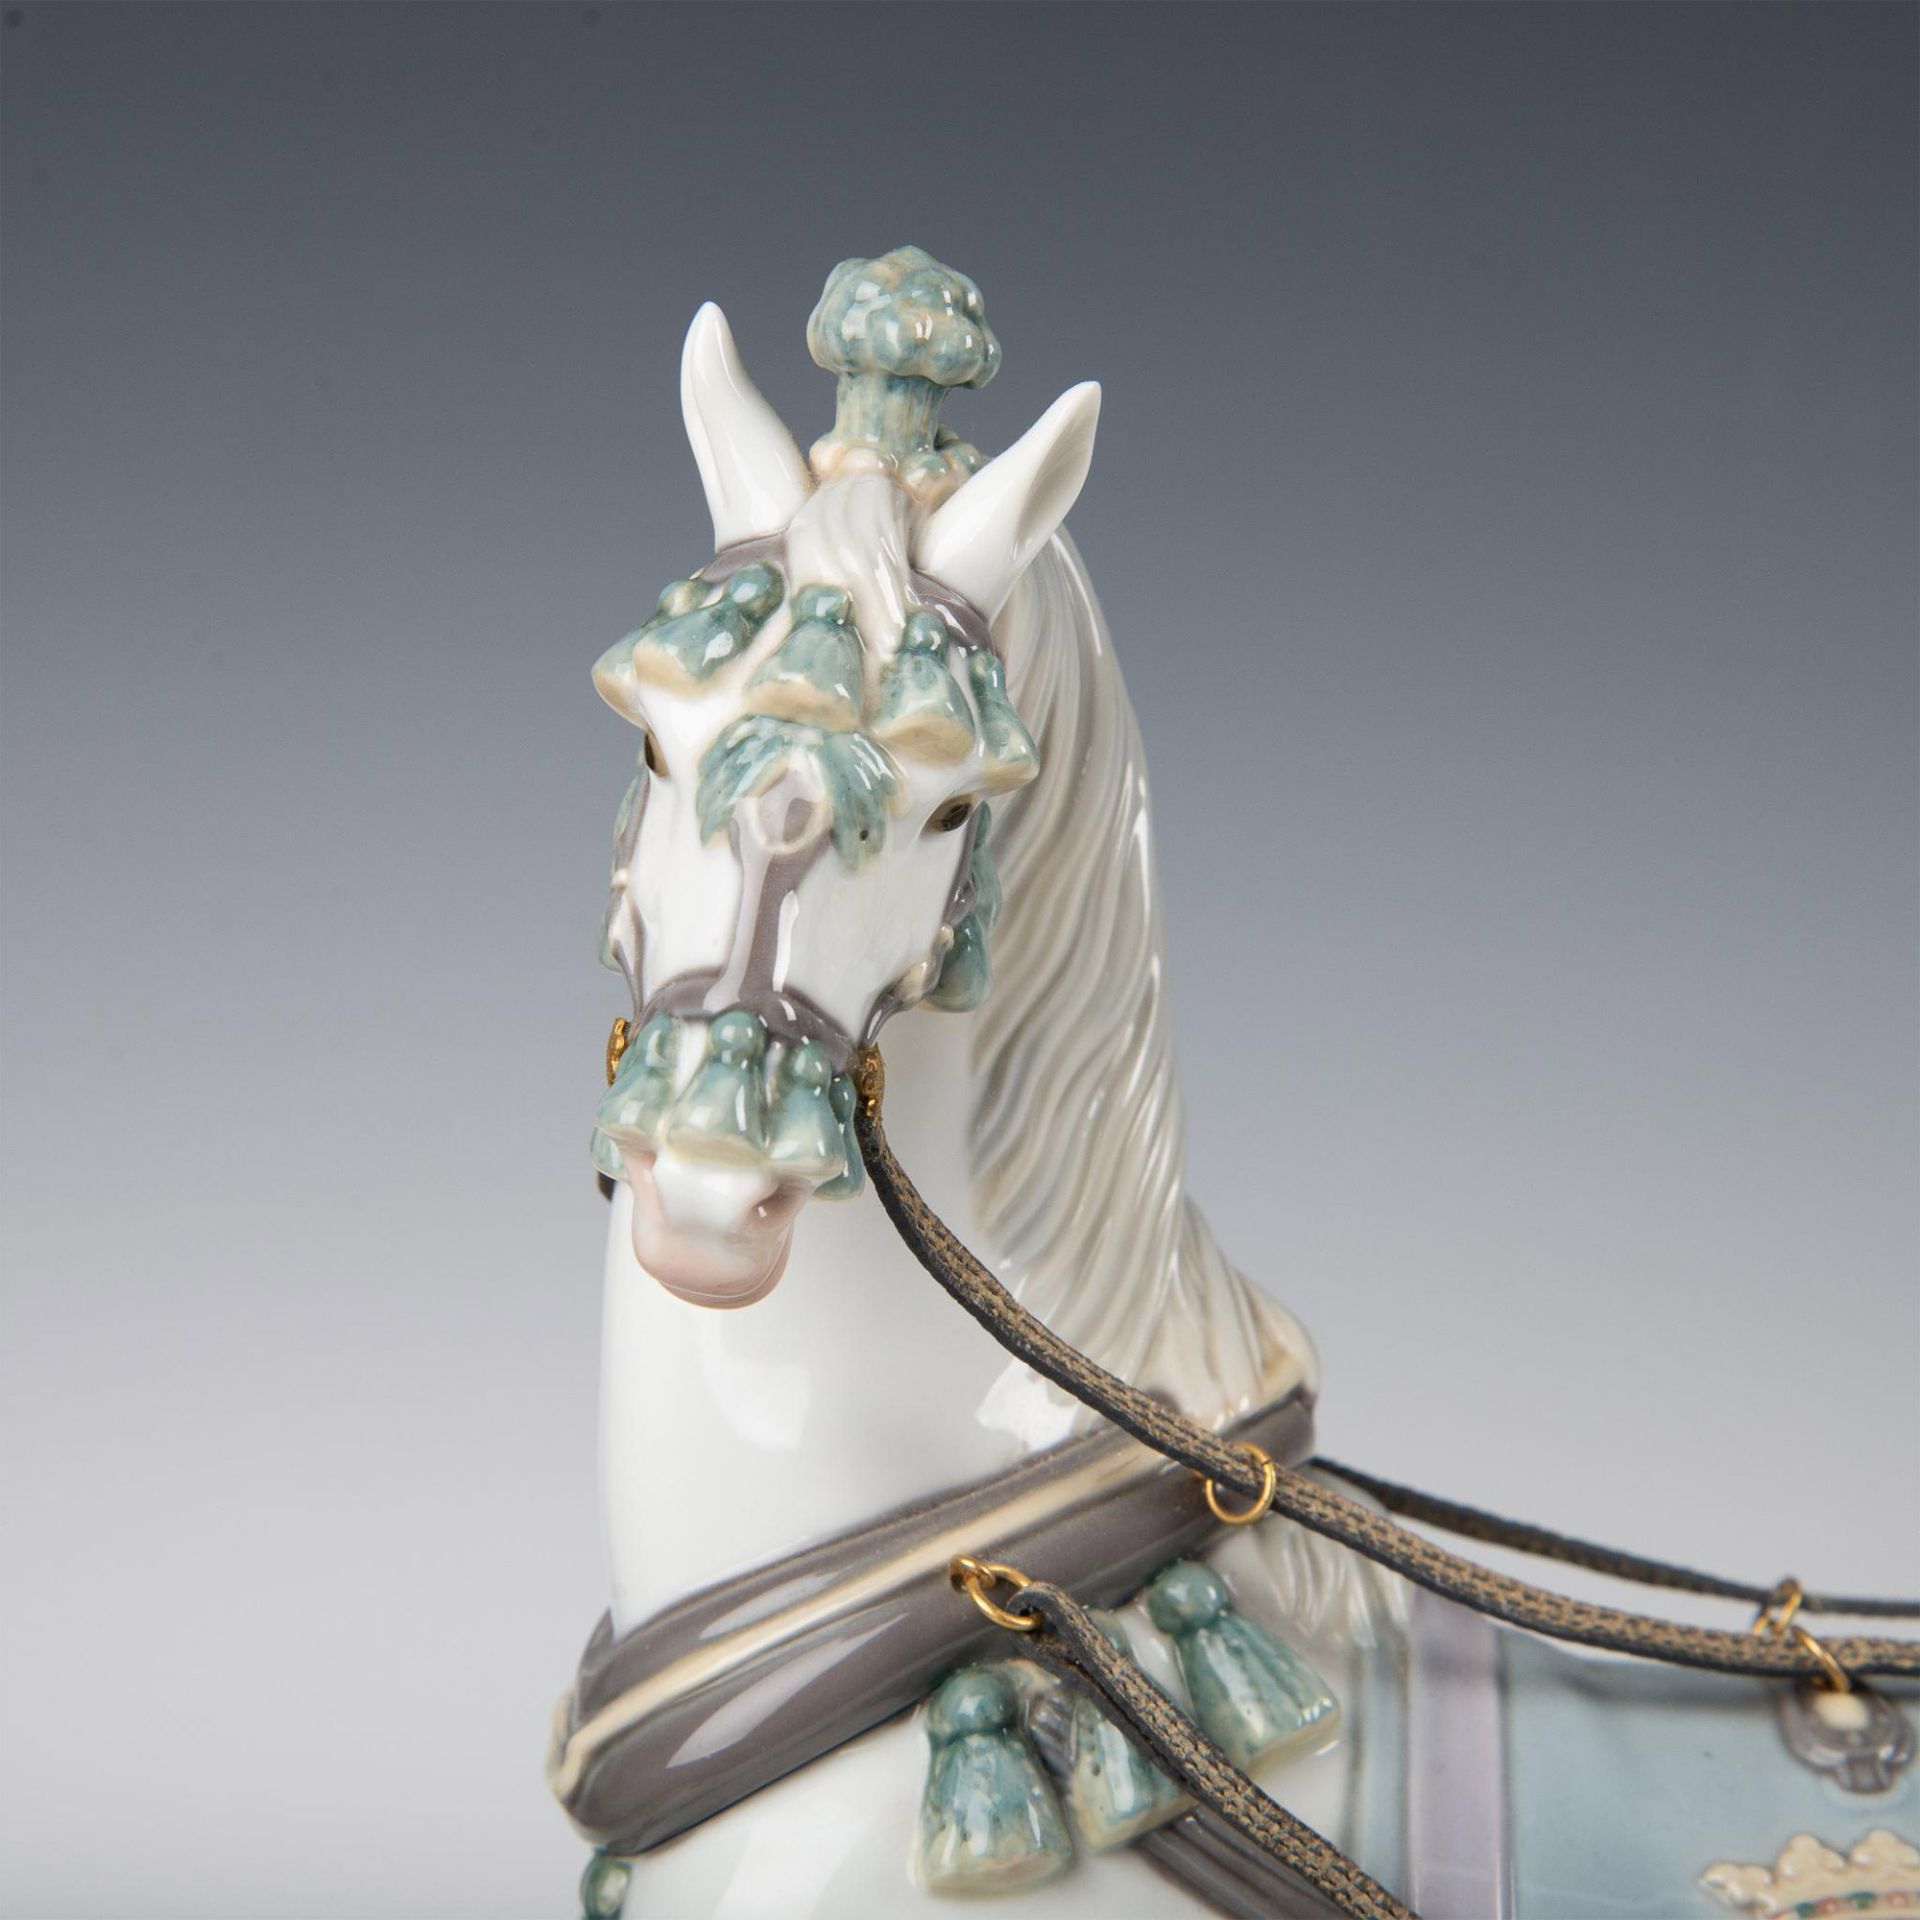 Lladro Porcelain Figurine, Outing in Seville 1001756 - Image 6 of 19